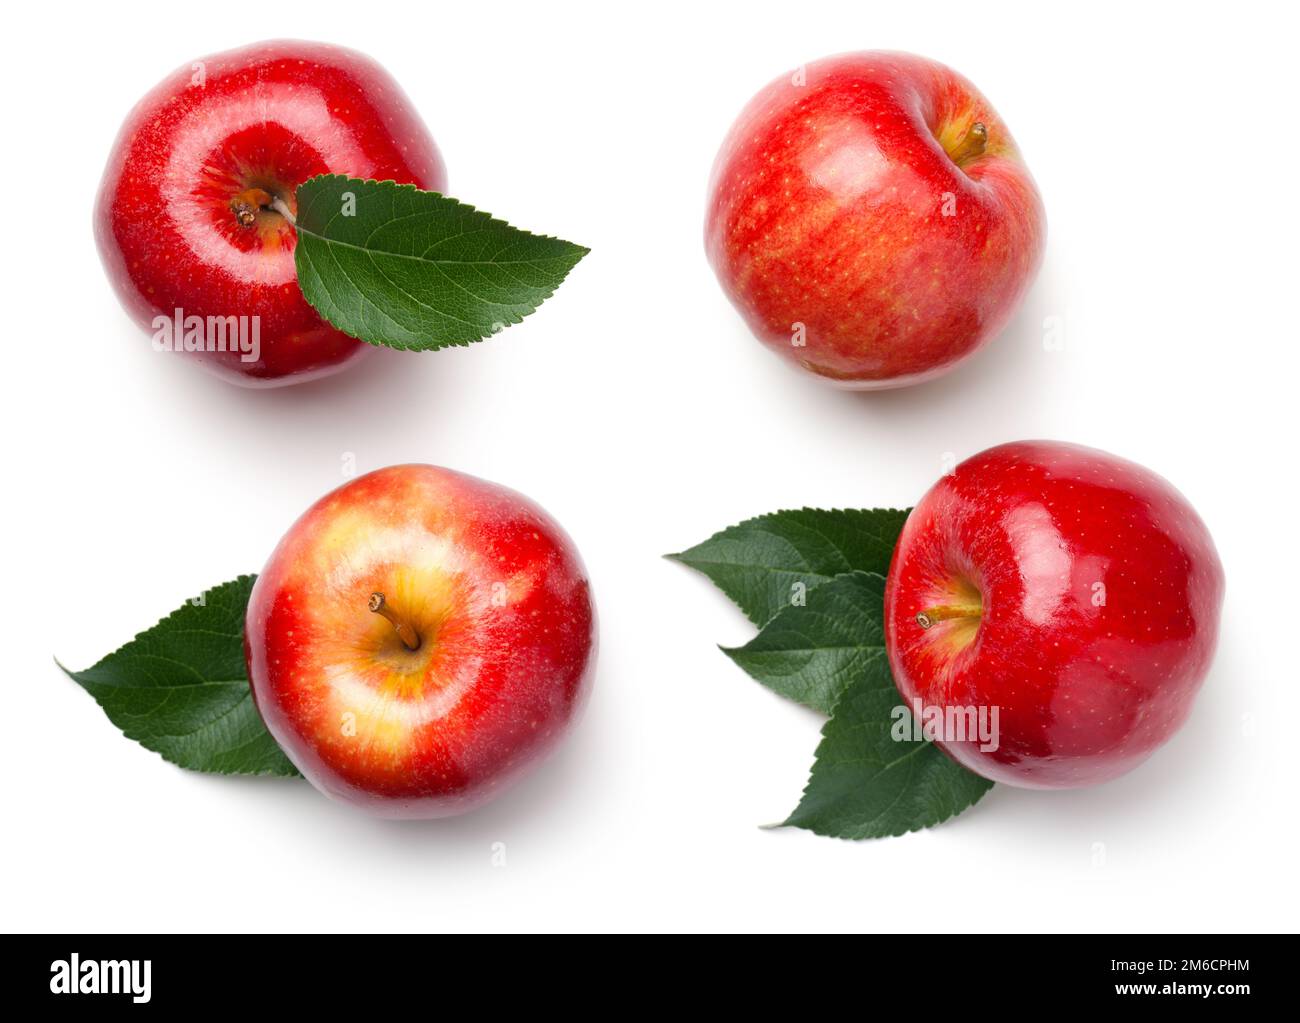 Red Apples Isolated on White Background Stock Photo